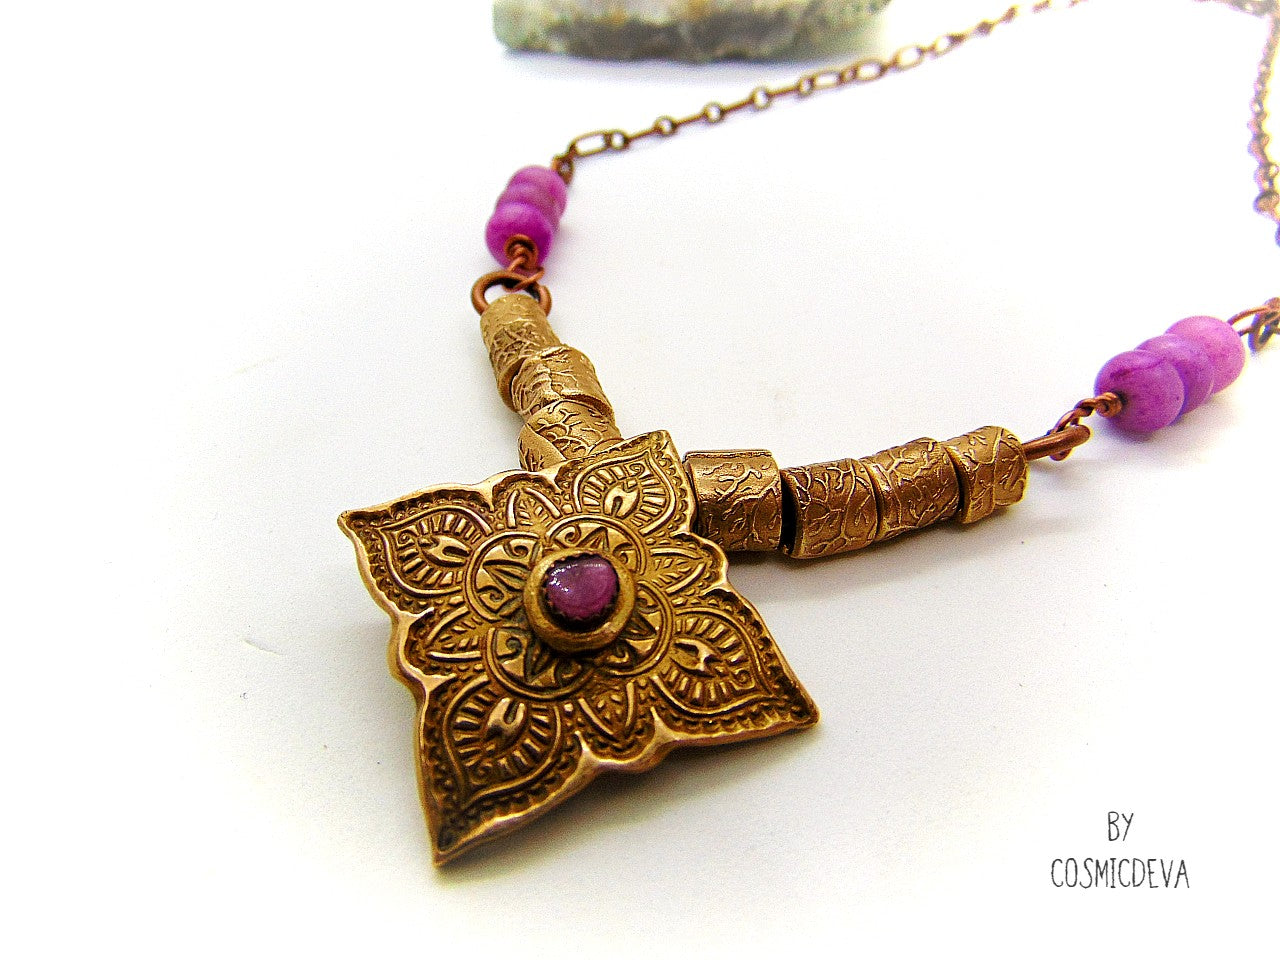 Enliven your wardrobe with this stunning Pink Tourmaline Mandala Mehndi Gold Bronze Necklace! Crafted with a unique hand formed bronze mandala pendant, pink tourmaline gemstone, and lovely pink jasper rondelle beads, this piece is perfect for yoga meditations or everyday wear. Adorn yourself with inspiring beauty! 